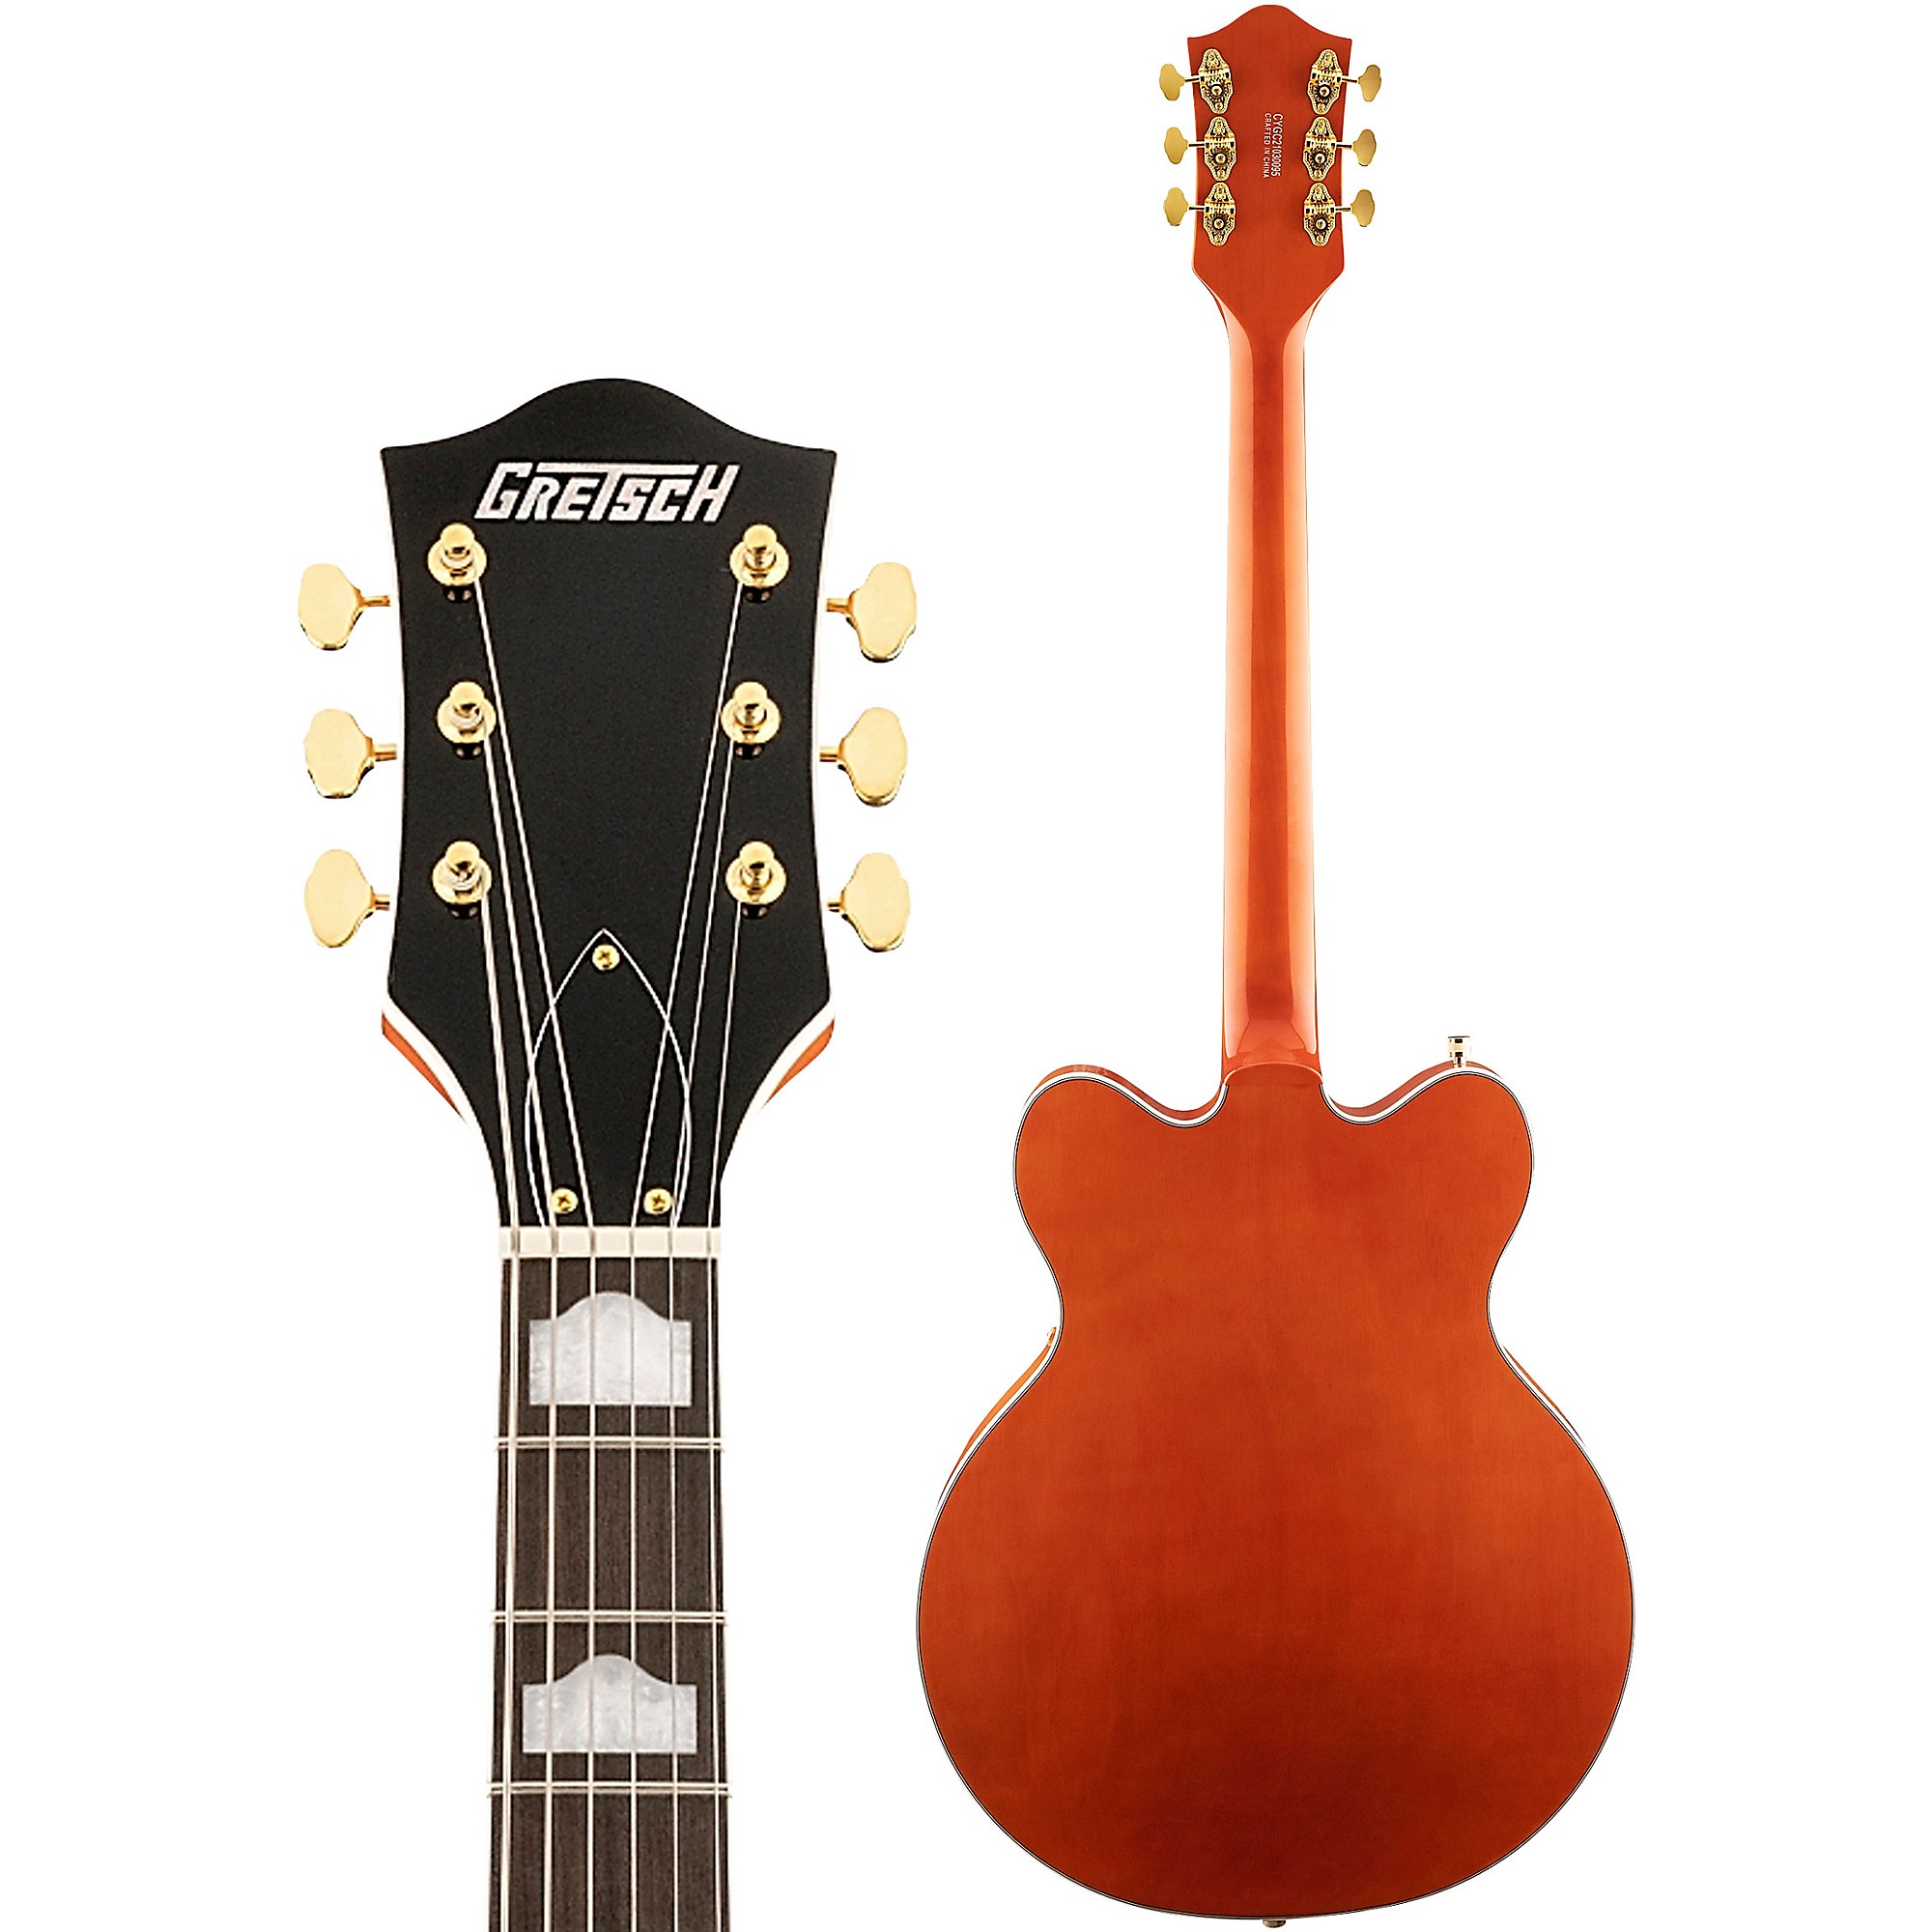  Gretsch G5422TG Electromatic Classic Hollow Body Double-Cut  6-String Electric Guitar with 12-Inch-Radius Laurel Fingerboard, Bigsby and Gold  Hardware (Right-Handed, Walnut Stain) : Musical Instruments